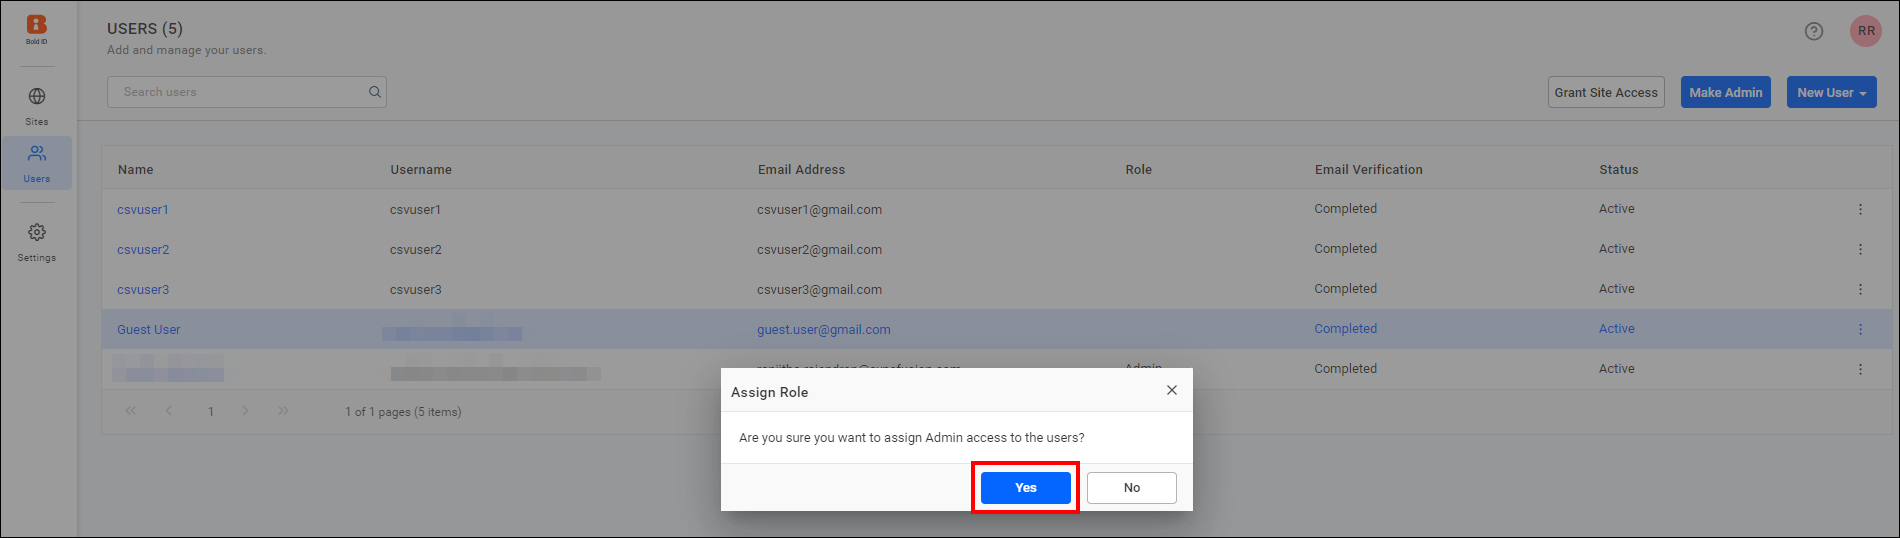 Assign Admin Role Confirmation